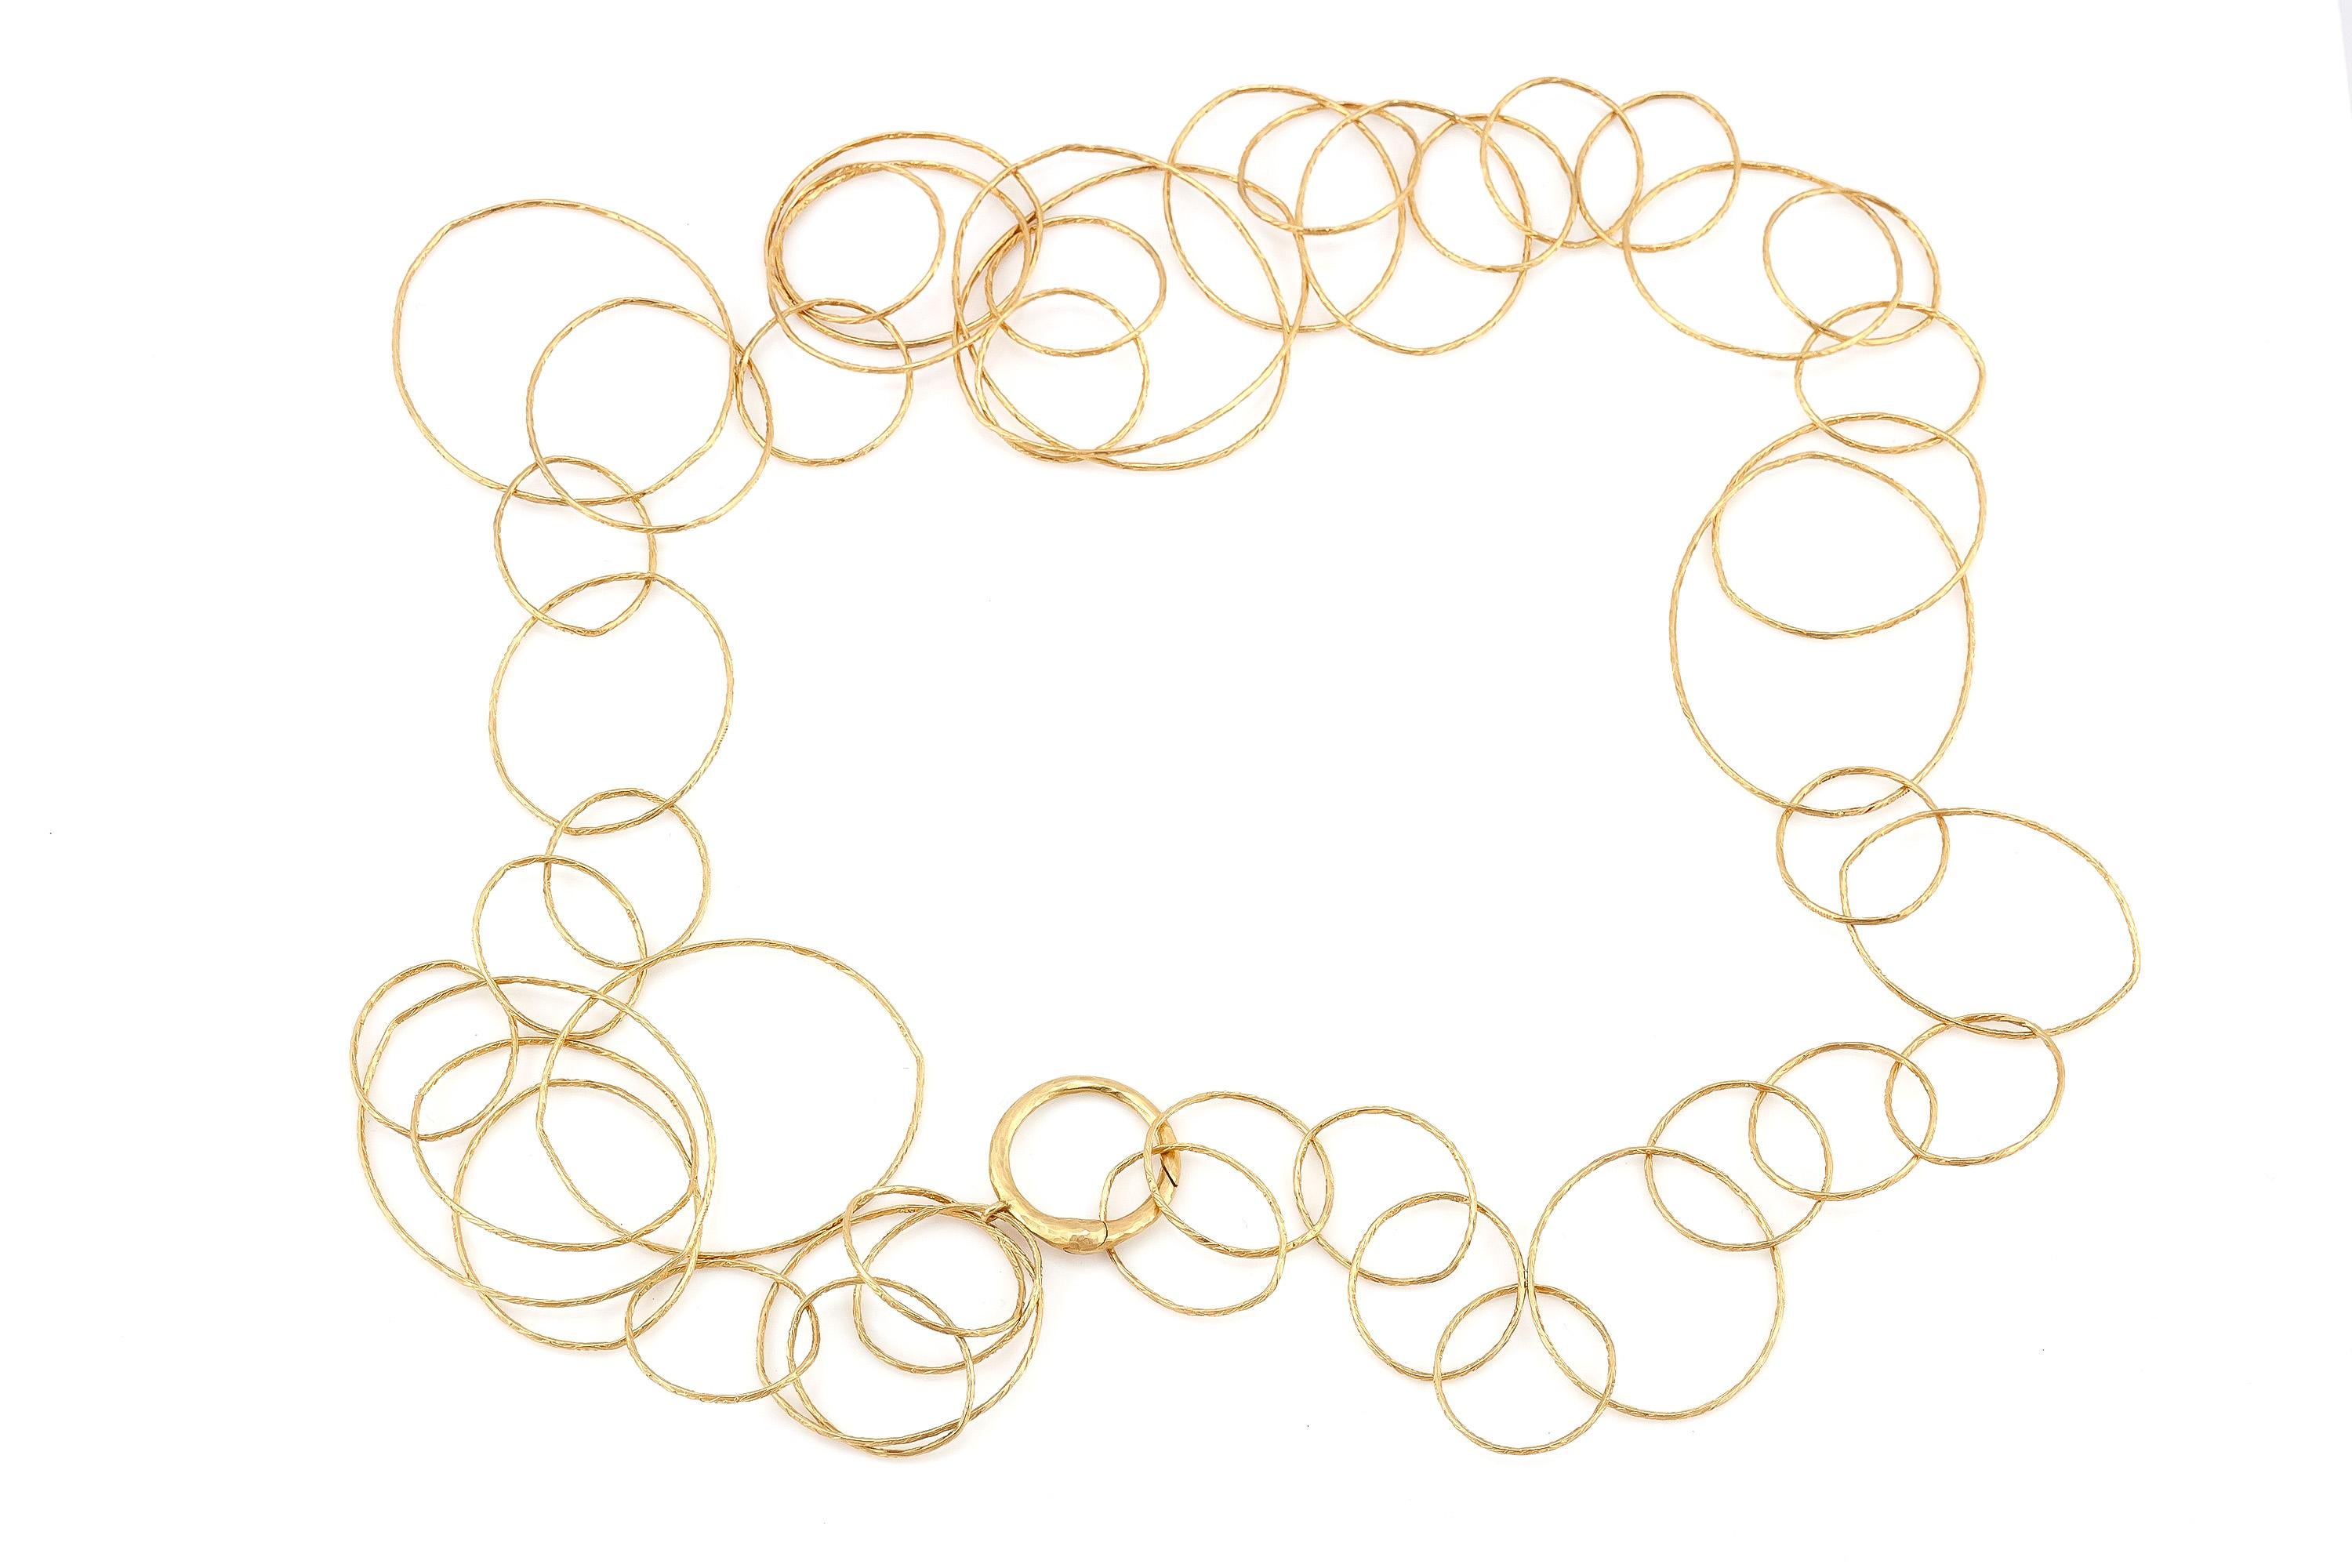 The beautiful gold link necklace is from the Hammered CIrcles Collection by Paloma Picasso for celebrating her 30 years with Tiffany & Co.
Finely crafted in 18k yellow gold.
50 grams.
52 inches long.